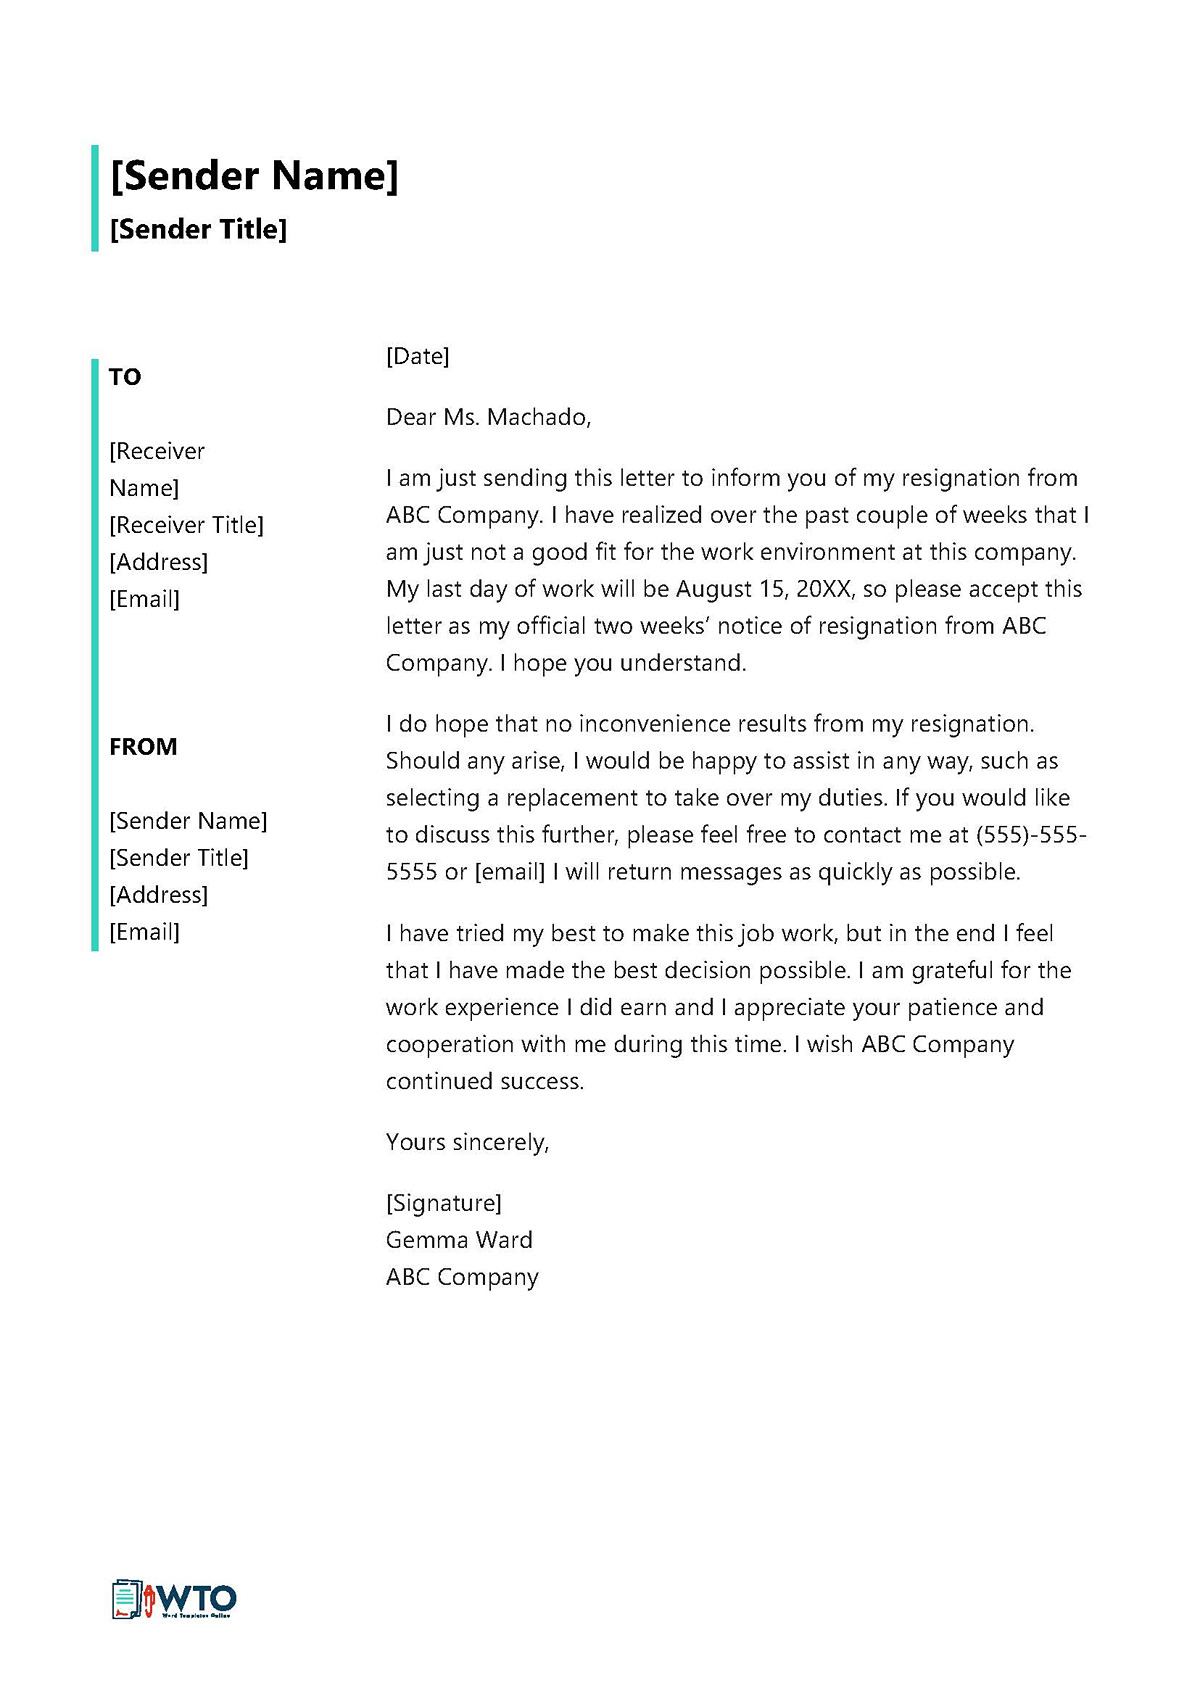 Resignation Letter - Ready-to-Use Word Document (Job Not a Good Fit)